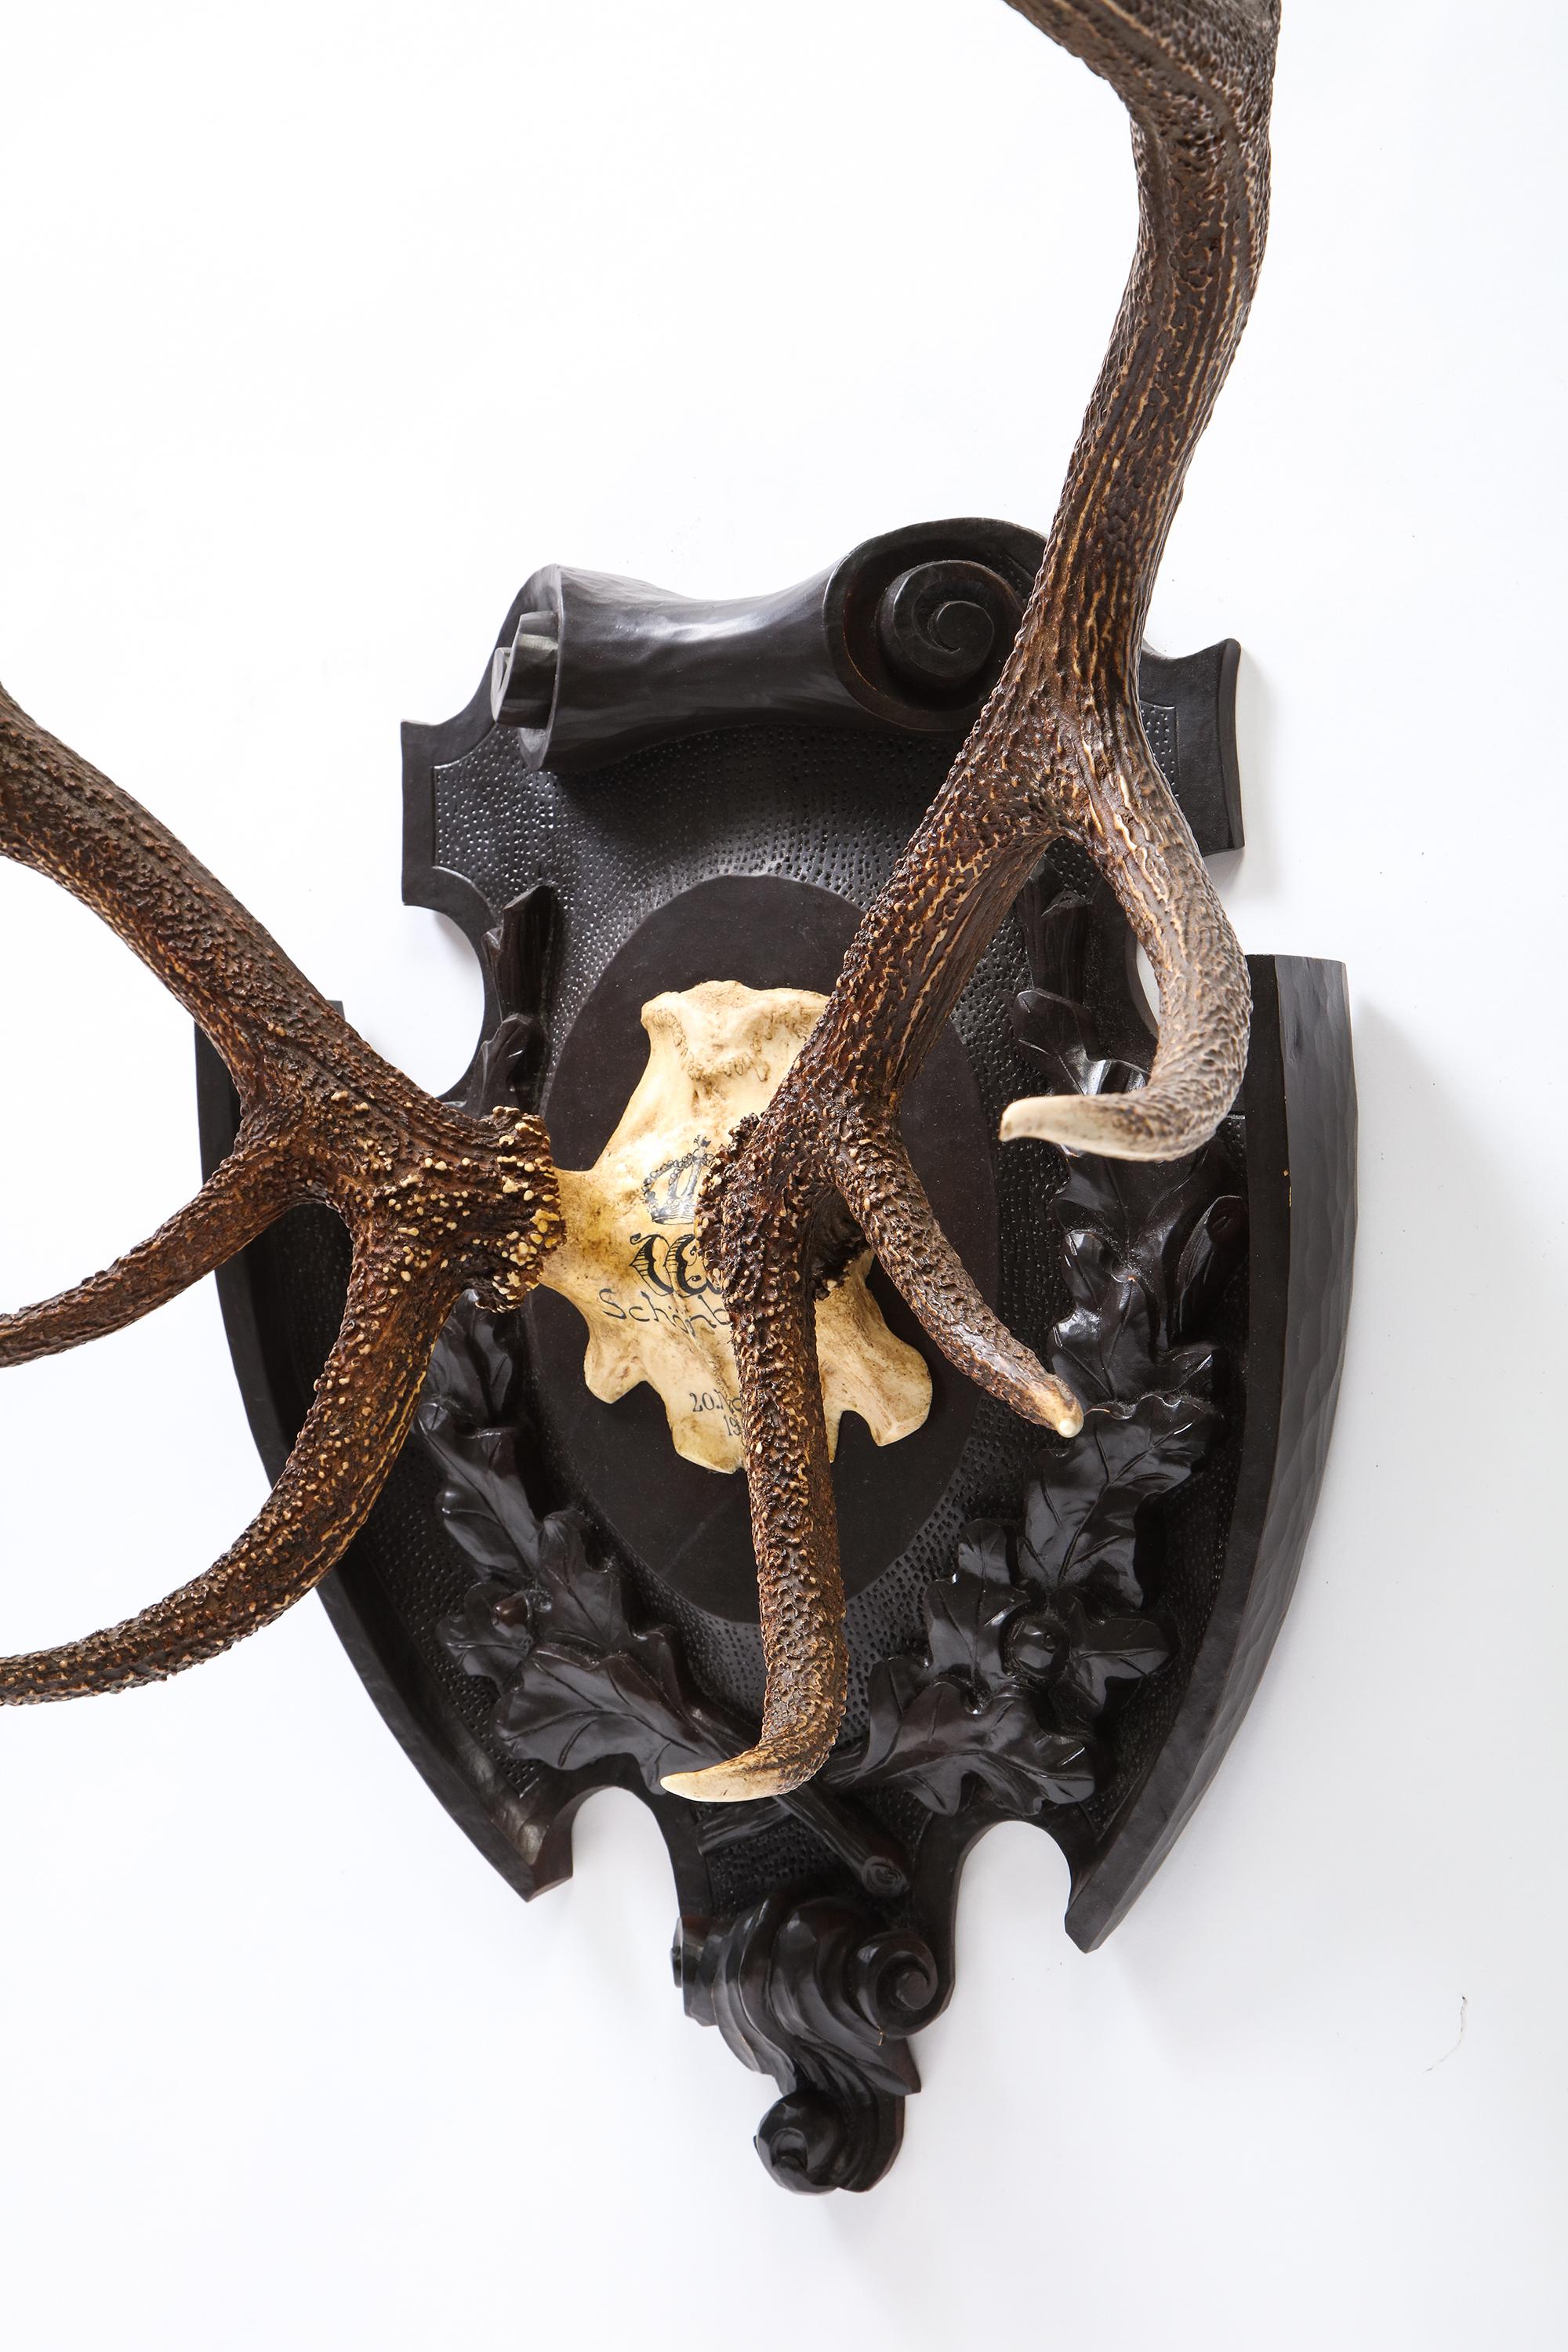 Pair of Swiss 'Black Forest' Antler Carved Trophy Mounts, Dated 1906 and 1906 For Sale 12